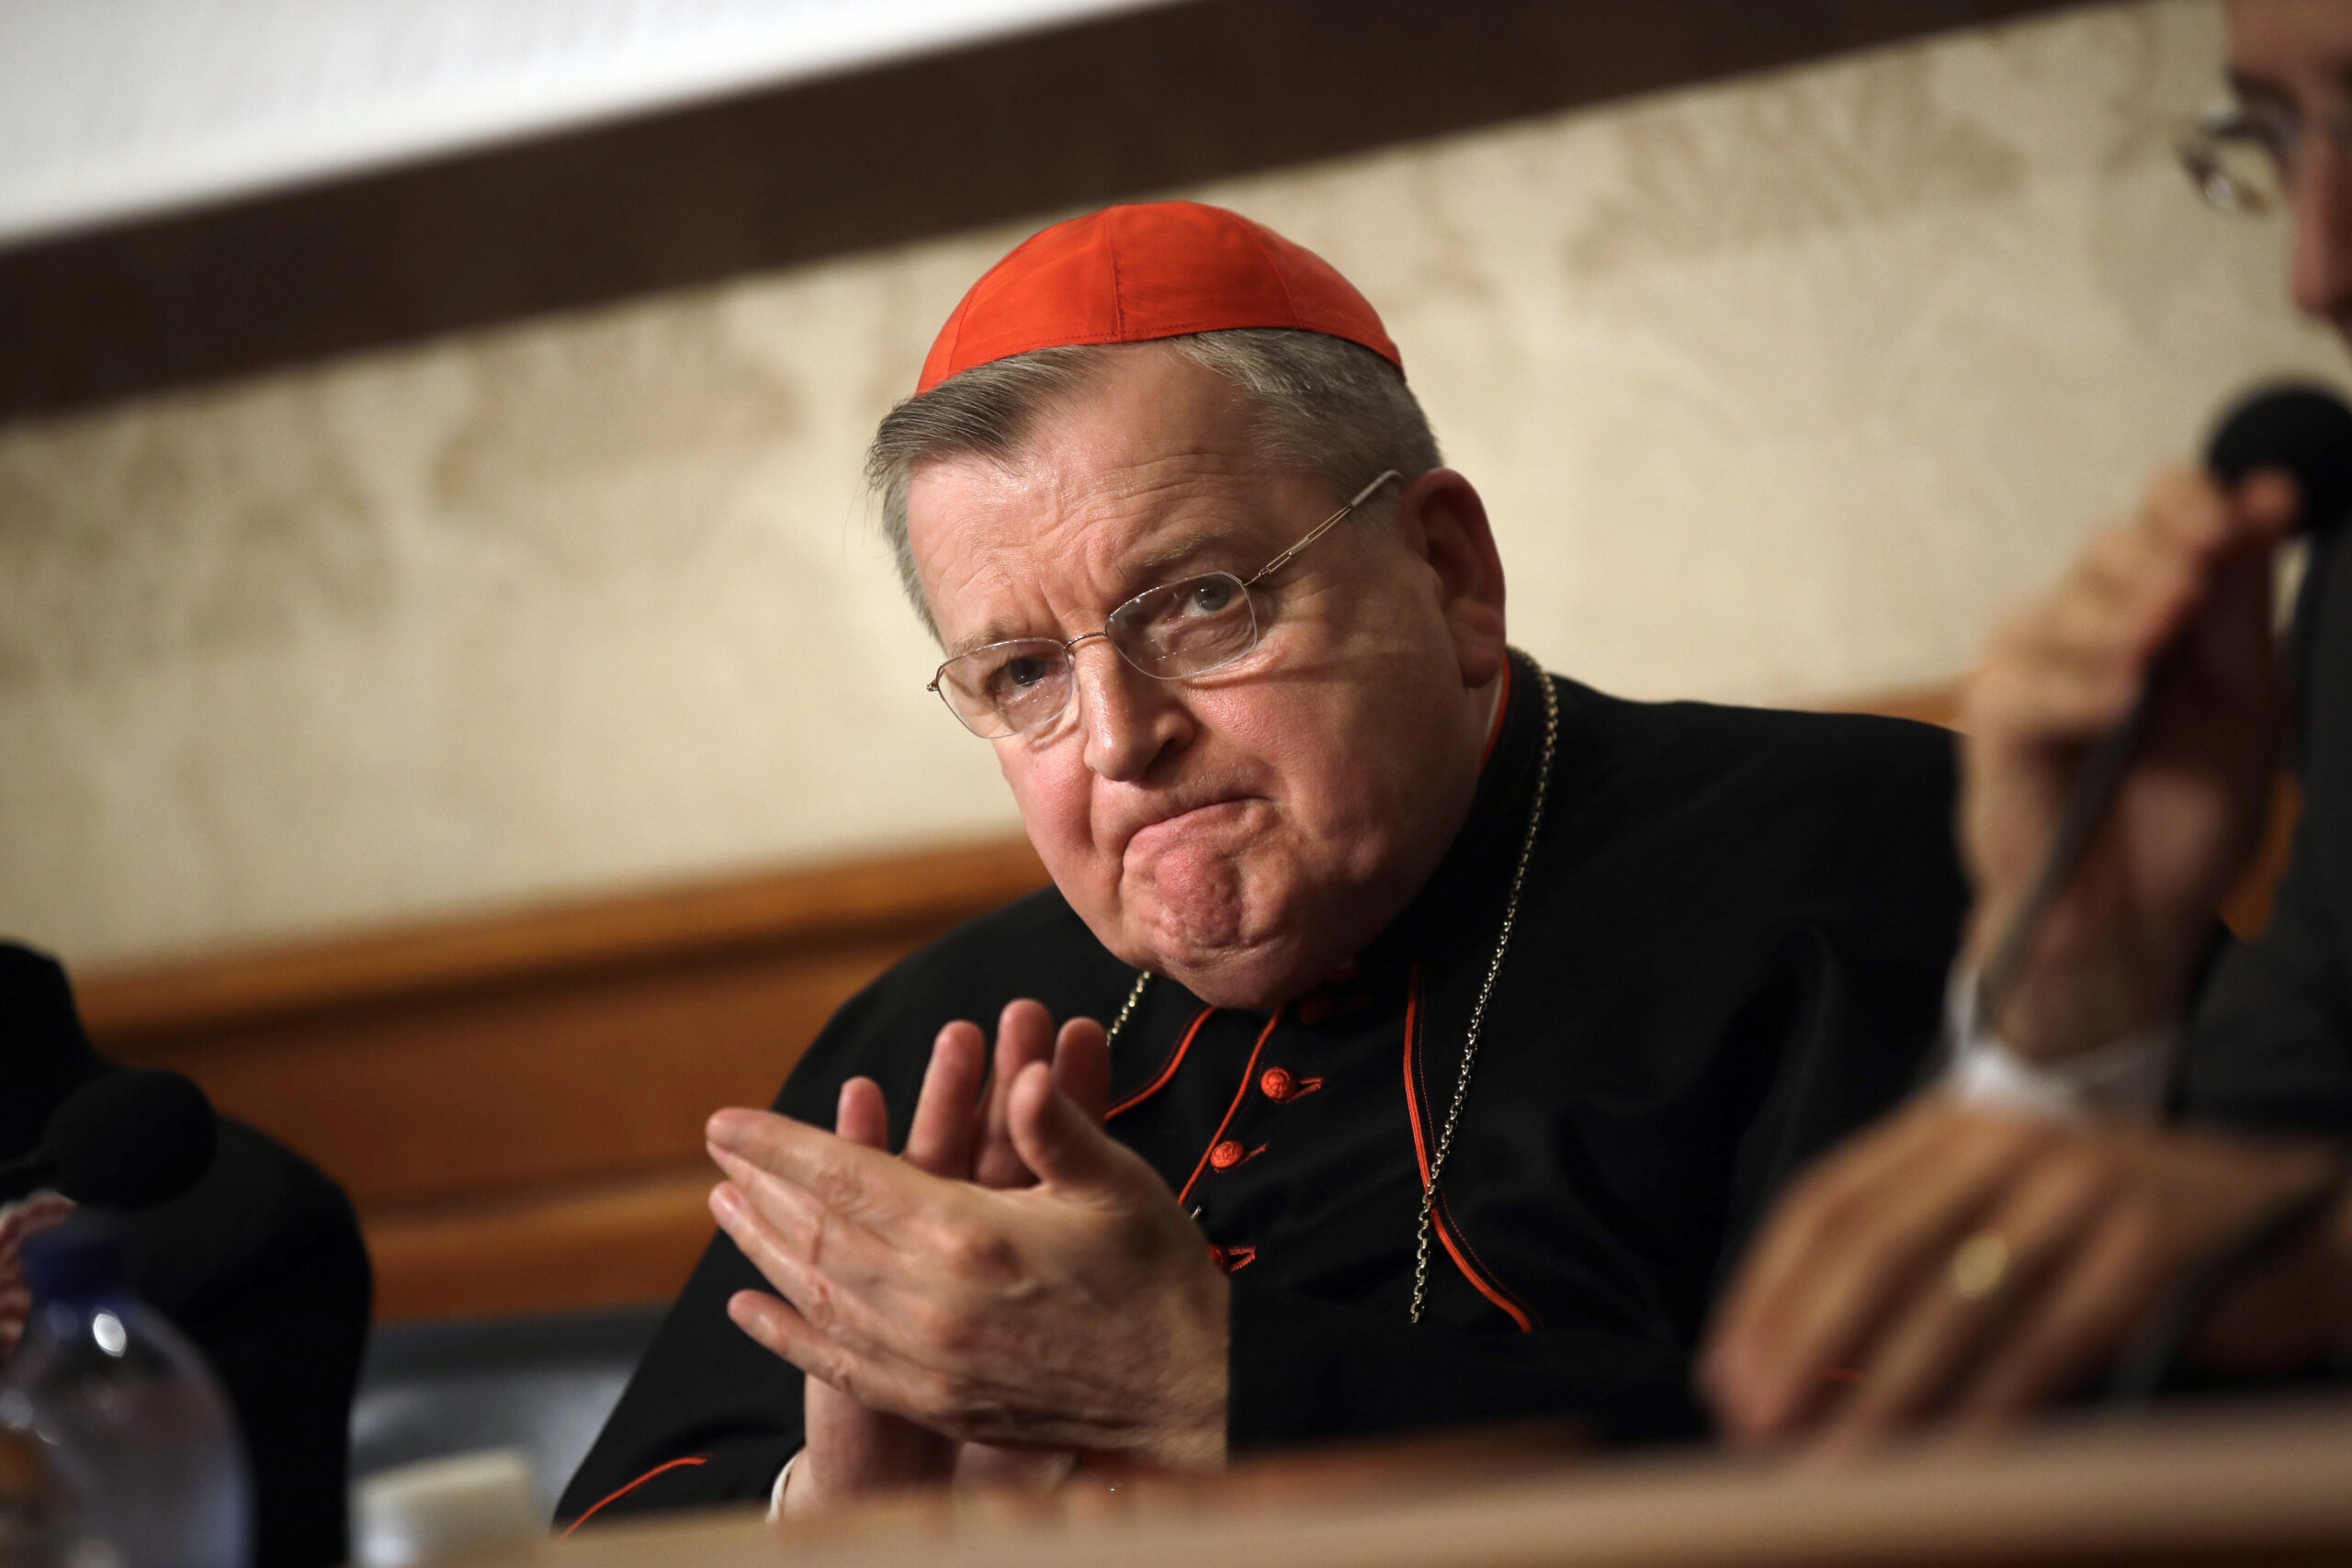 FILE - In this Sept. 6, 2018 file photo, Cardinal Raymond Burke applauds during a news conference at the Italian Senate, in Rome. Burke, a high-ranking Roman Catholic cardinal who was placed on a ventilator after contracting COVID-19 said he has moved into a house but is still struggling to recover from the disease. (AP Photo/Alessandra Tarantino, File)